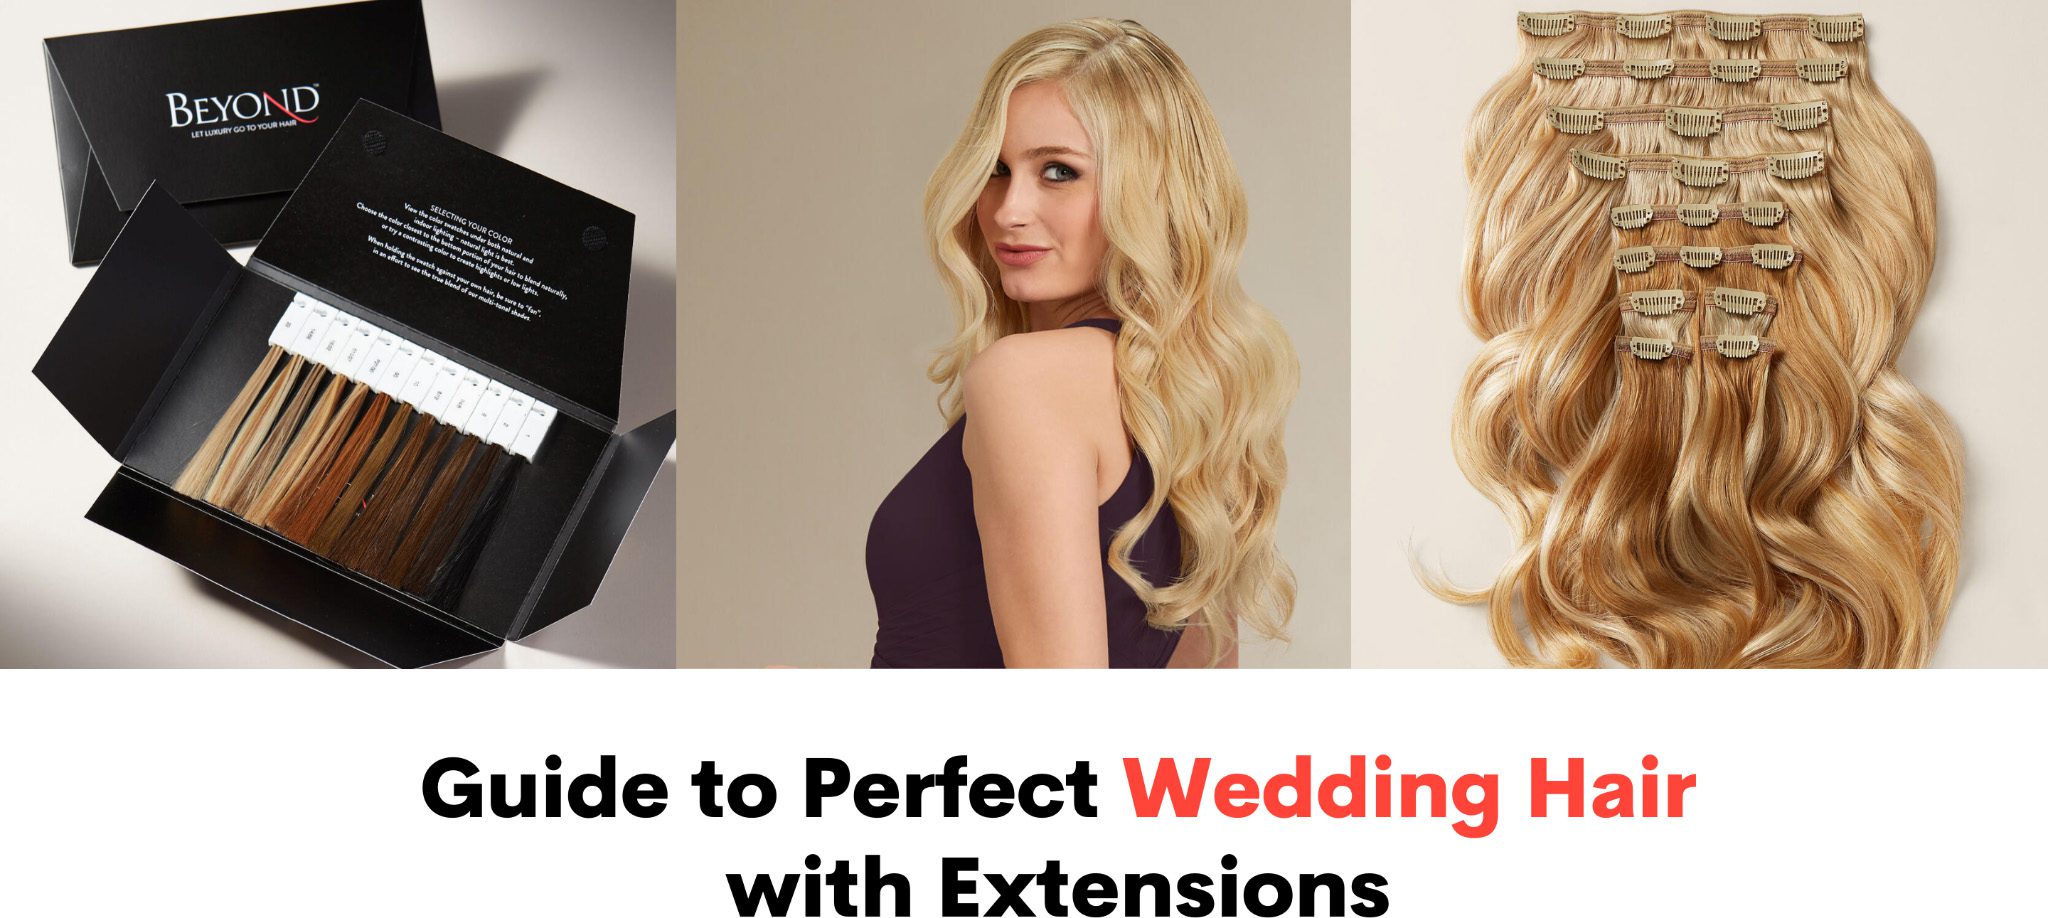 Guide to Perfect Wedding Hair with Extensions